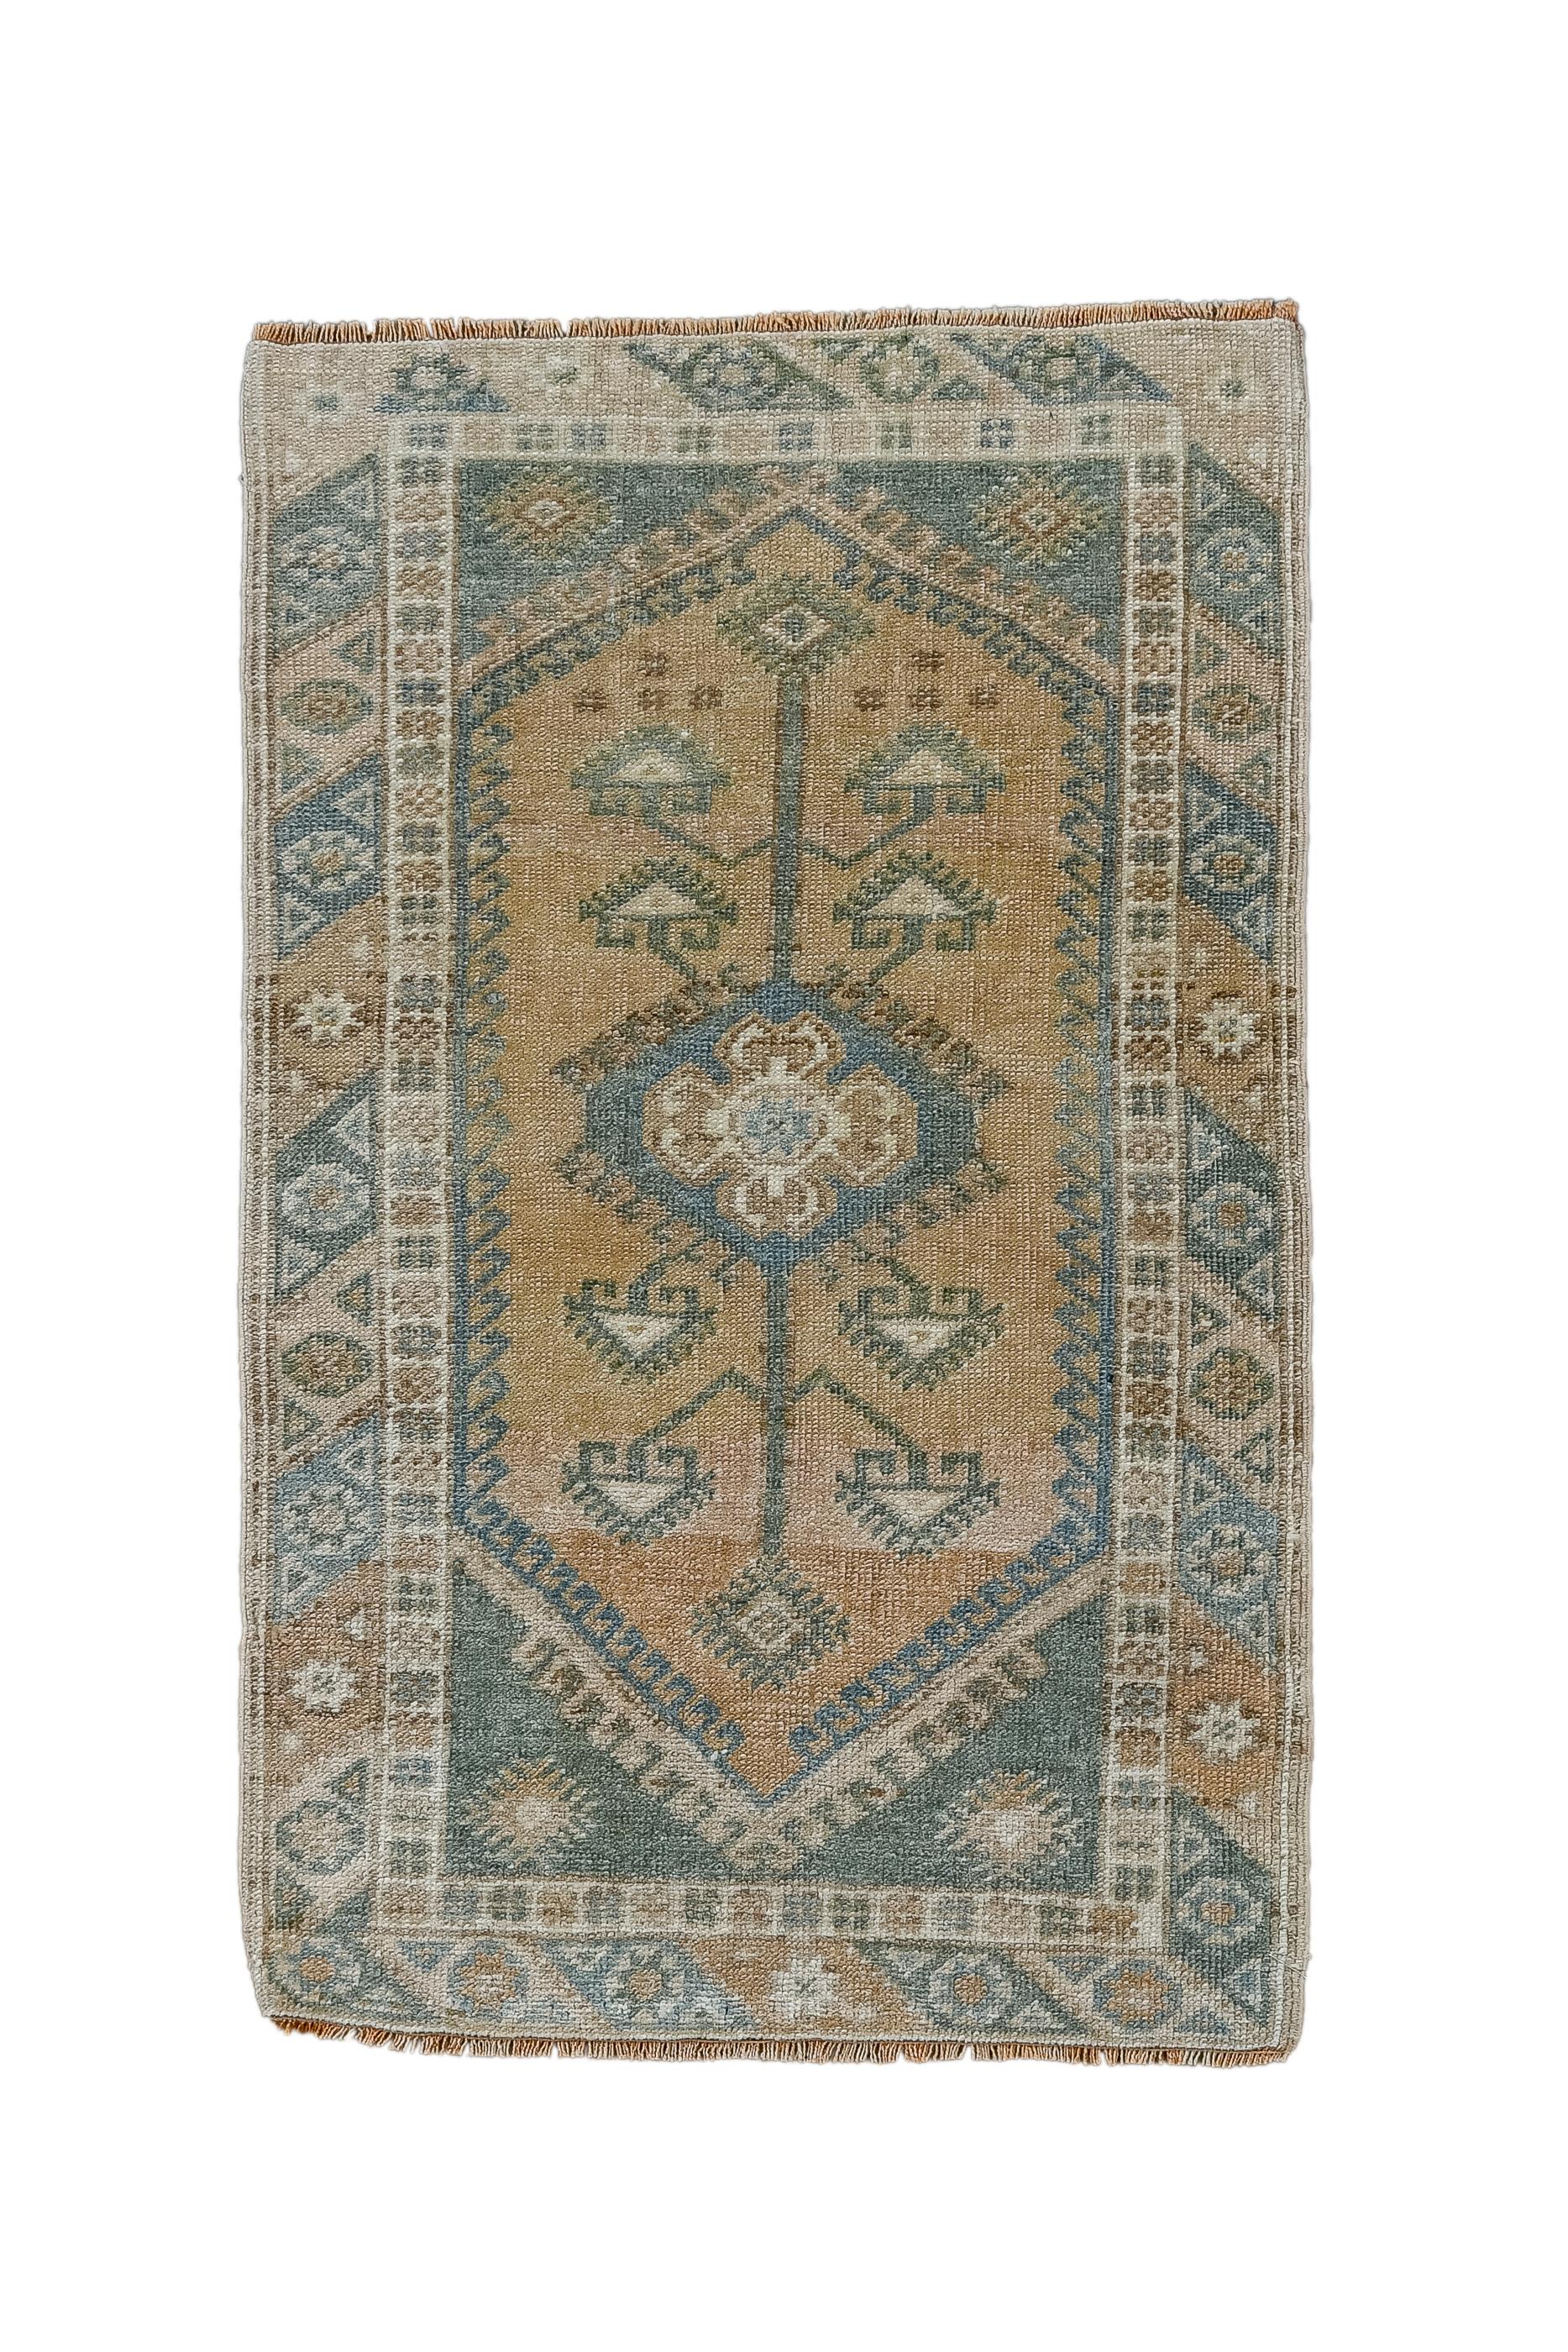 This little rustic Anatolian scatter features a rust field with a central medallion, long vertical extenders and eight triangular sprouting blossoms. Slate hooked corners. Characteristic border of rhomboids enclosing octagons and stars. Wool